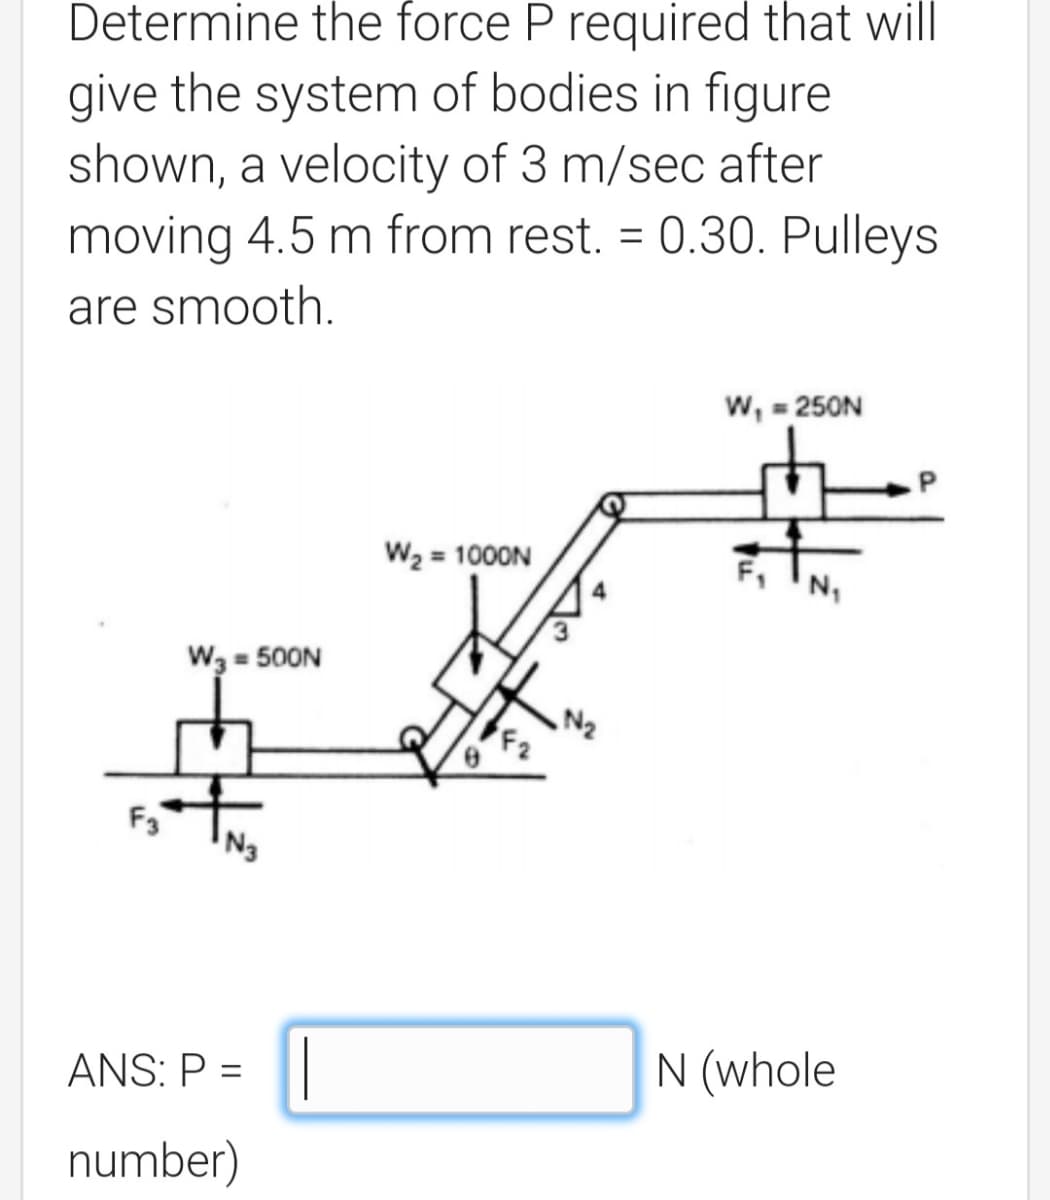 Determine the force P required that will
give the system of bodies in figure
shown, a velocity of 3 m/sec after
moving 4.5 m from rest. = 0.30. Pulleys
%3D
are smooth.
w, = 250N
W2 = 1000N
W3 = 500N
N2
F2
F3
ANS: P =
N (whole
%3D
number)
